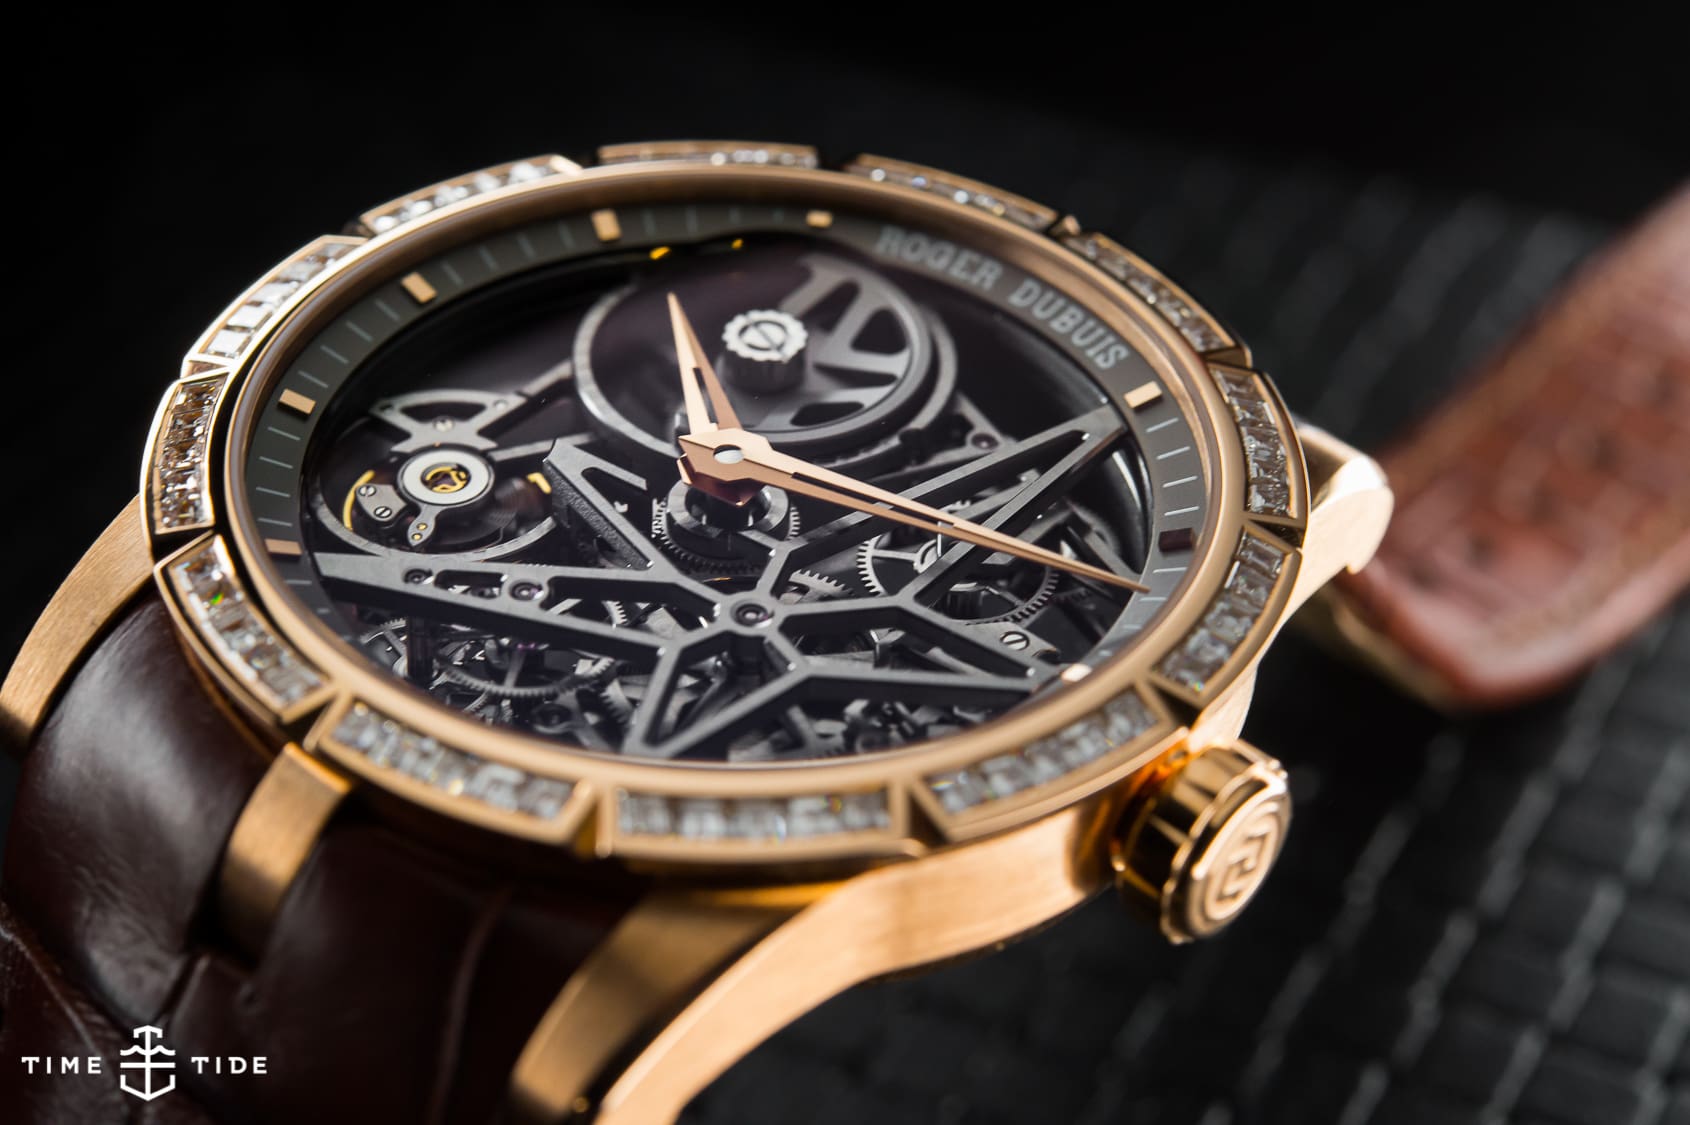 HANDS ON: The Roger Dubuis Excalibur Automatic Skeleton